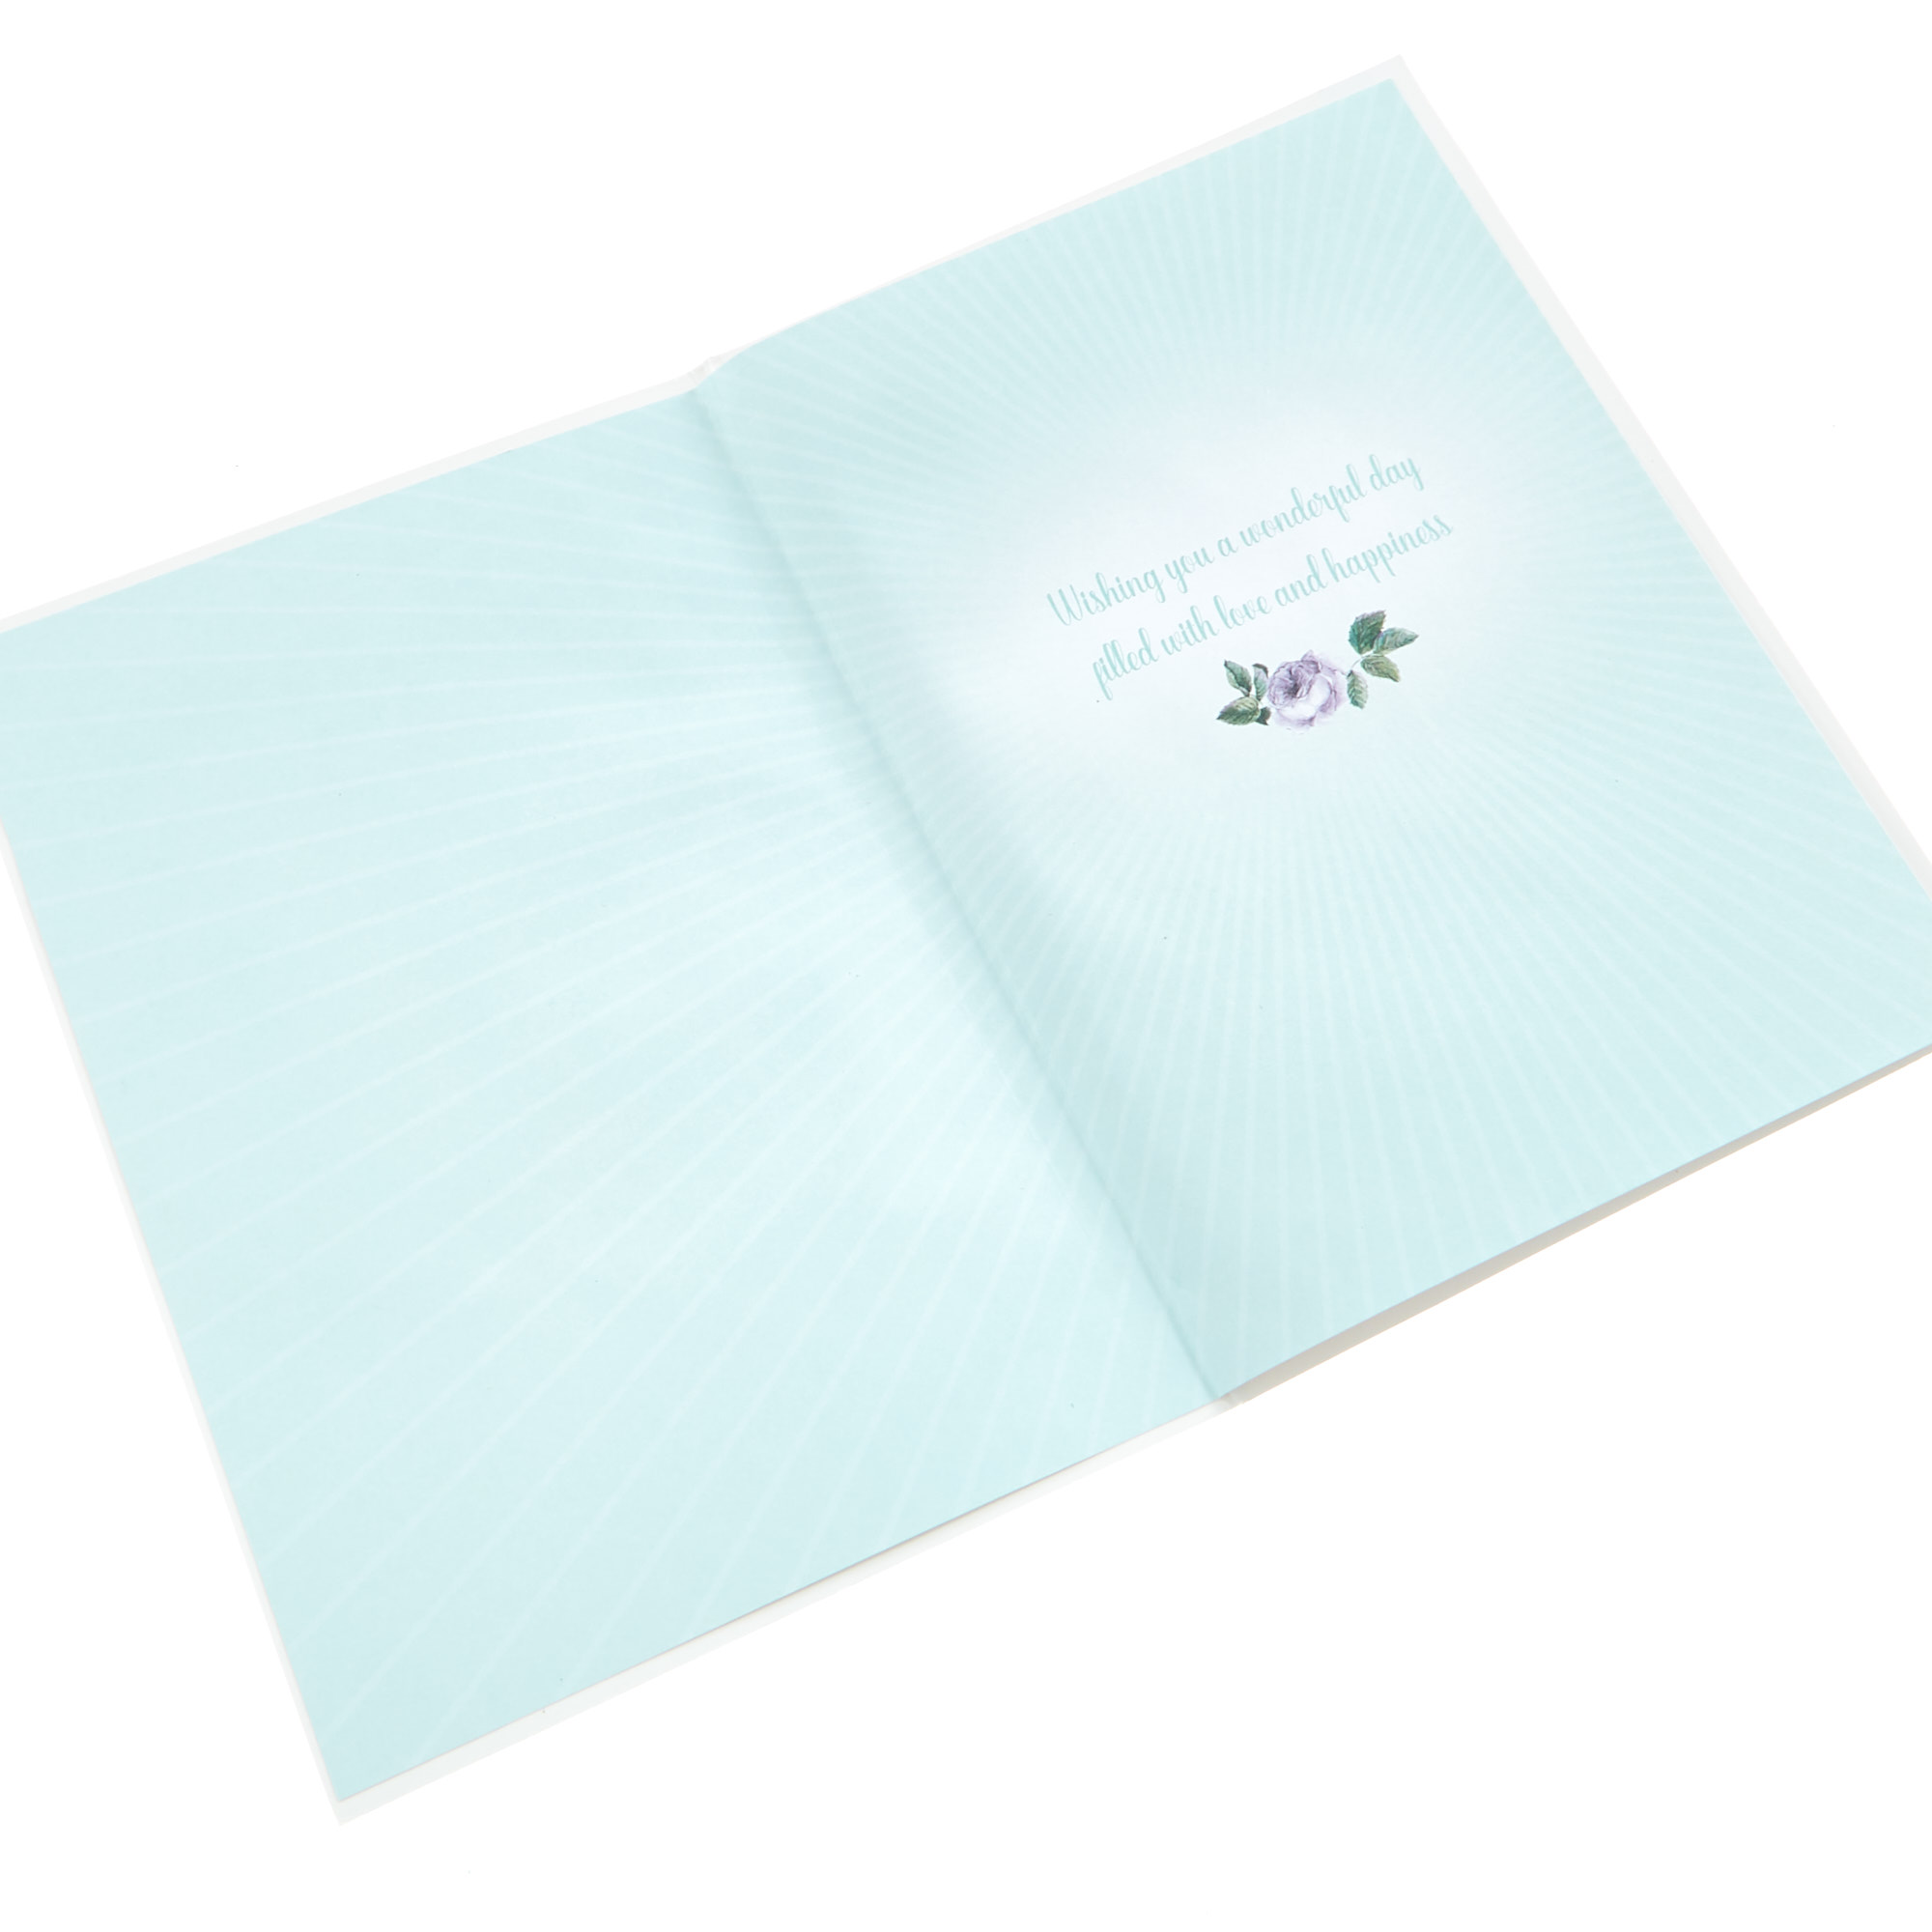 30th Anniversary Card - On Your Pearl Anniversary 